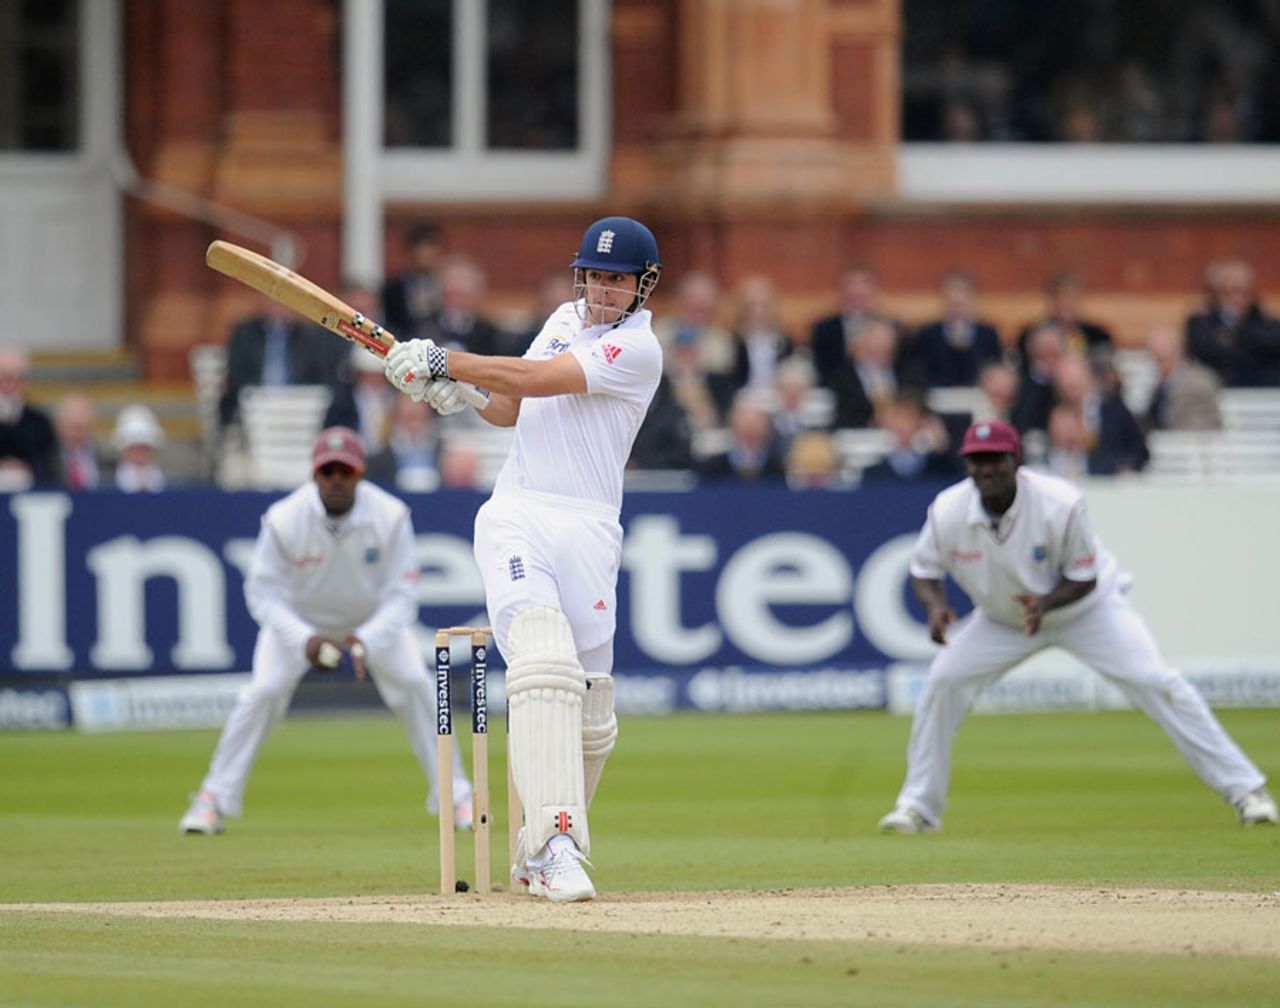 Alastair Cook cracks away a strong pull shot, England v West Indies, 1st Test, Lord's, 5th day, May 21, 2012